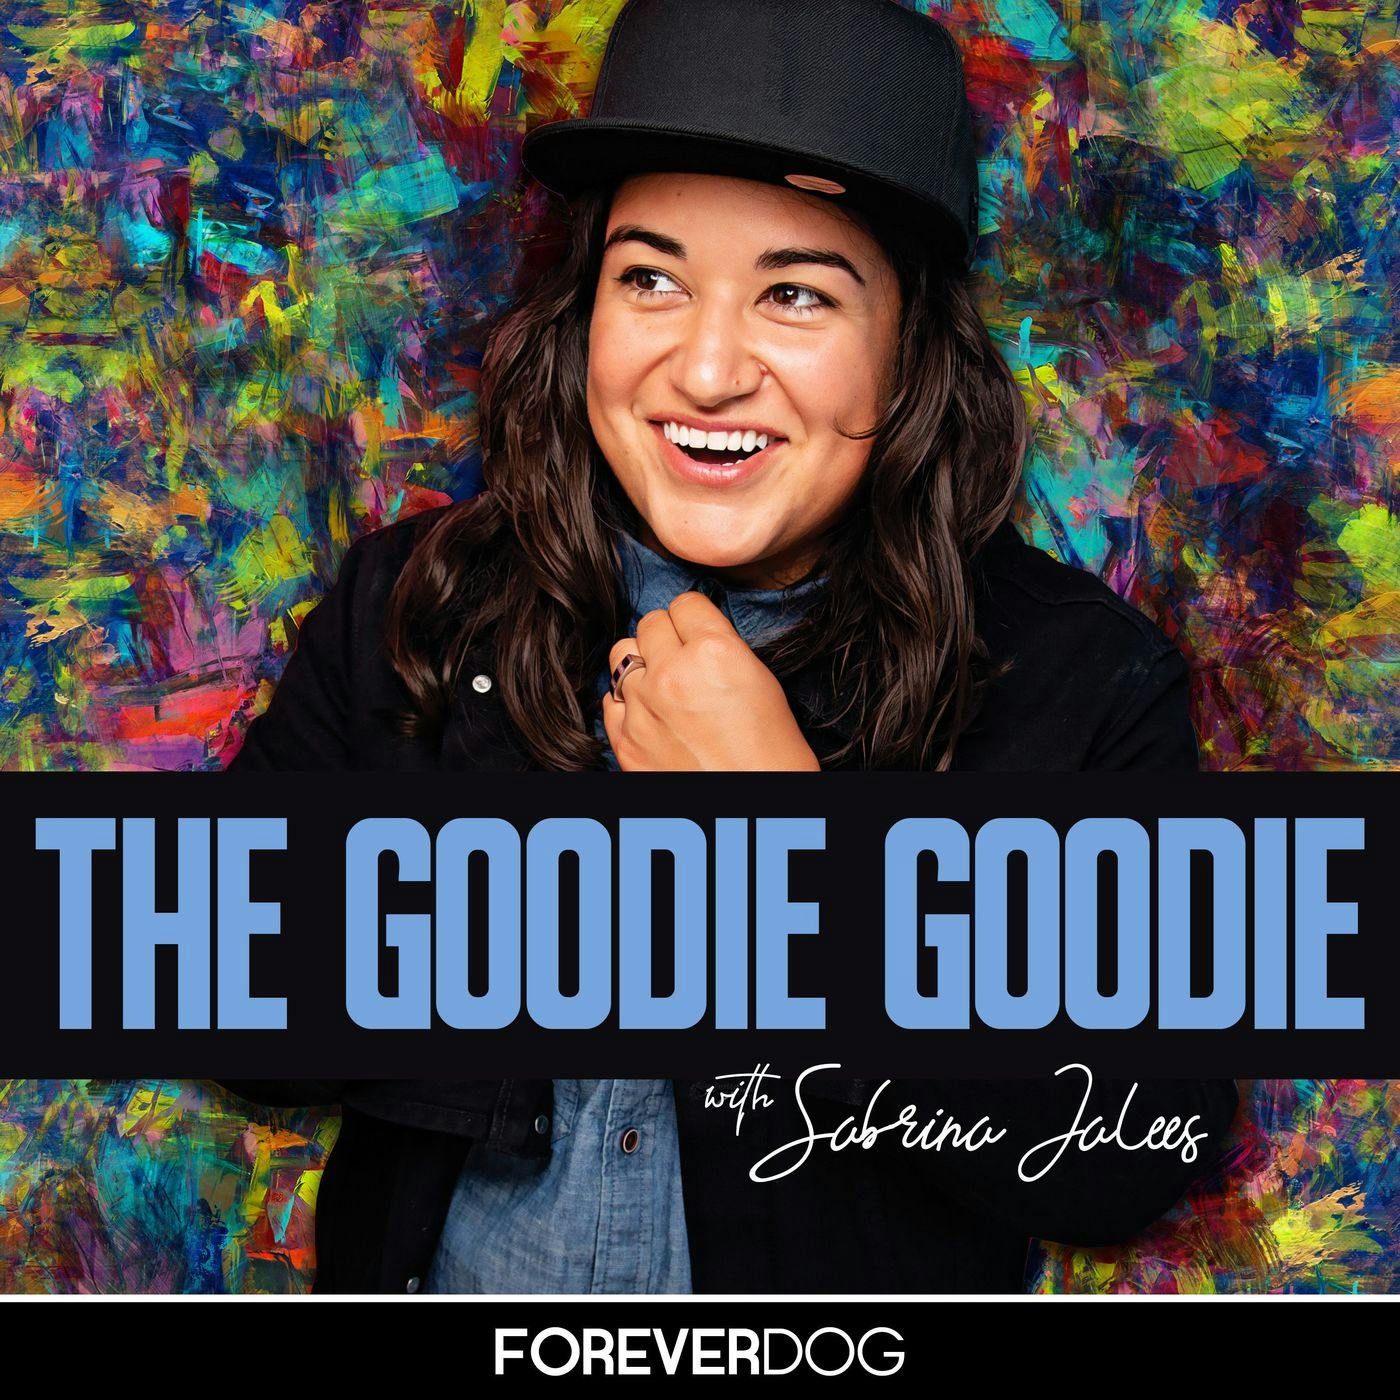 THE GOODIE GOODIE PREVIEW